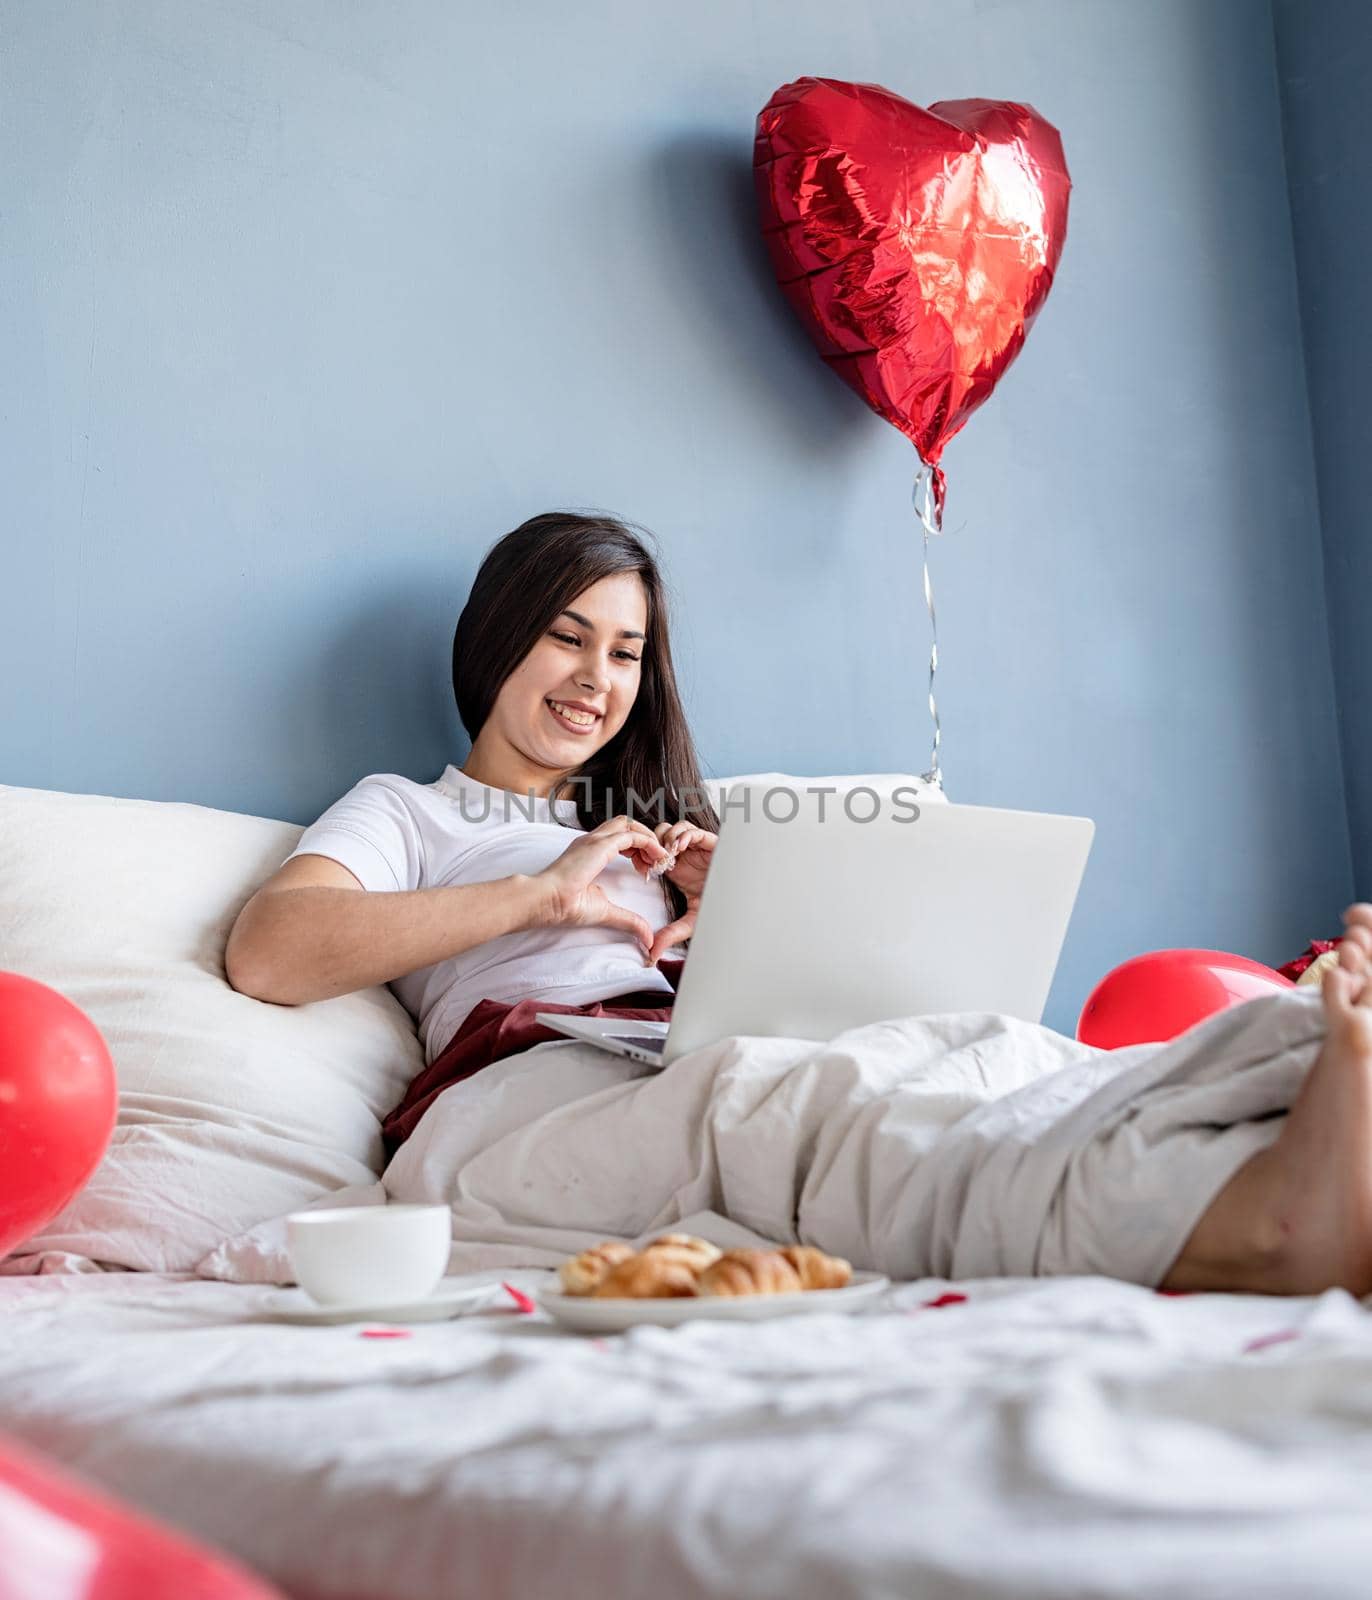 Valentines Day. Young happy brunette woman sitting in the bed with red heart shaped balloons chatting with her boyfriend on laptop showing heart gesture with hands